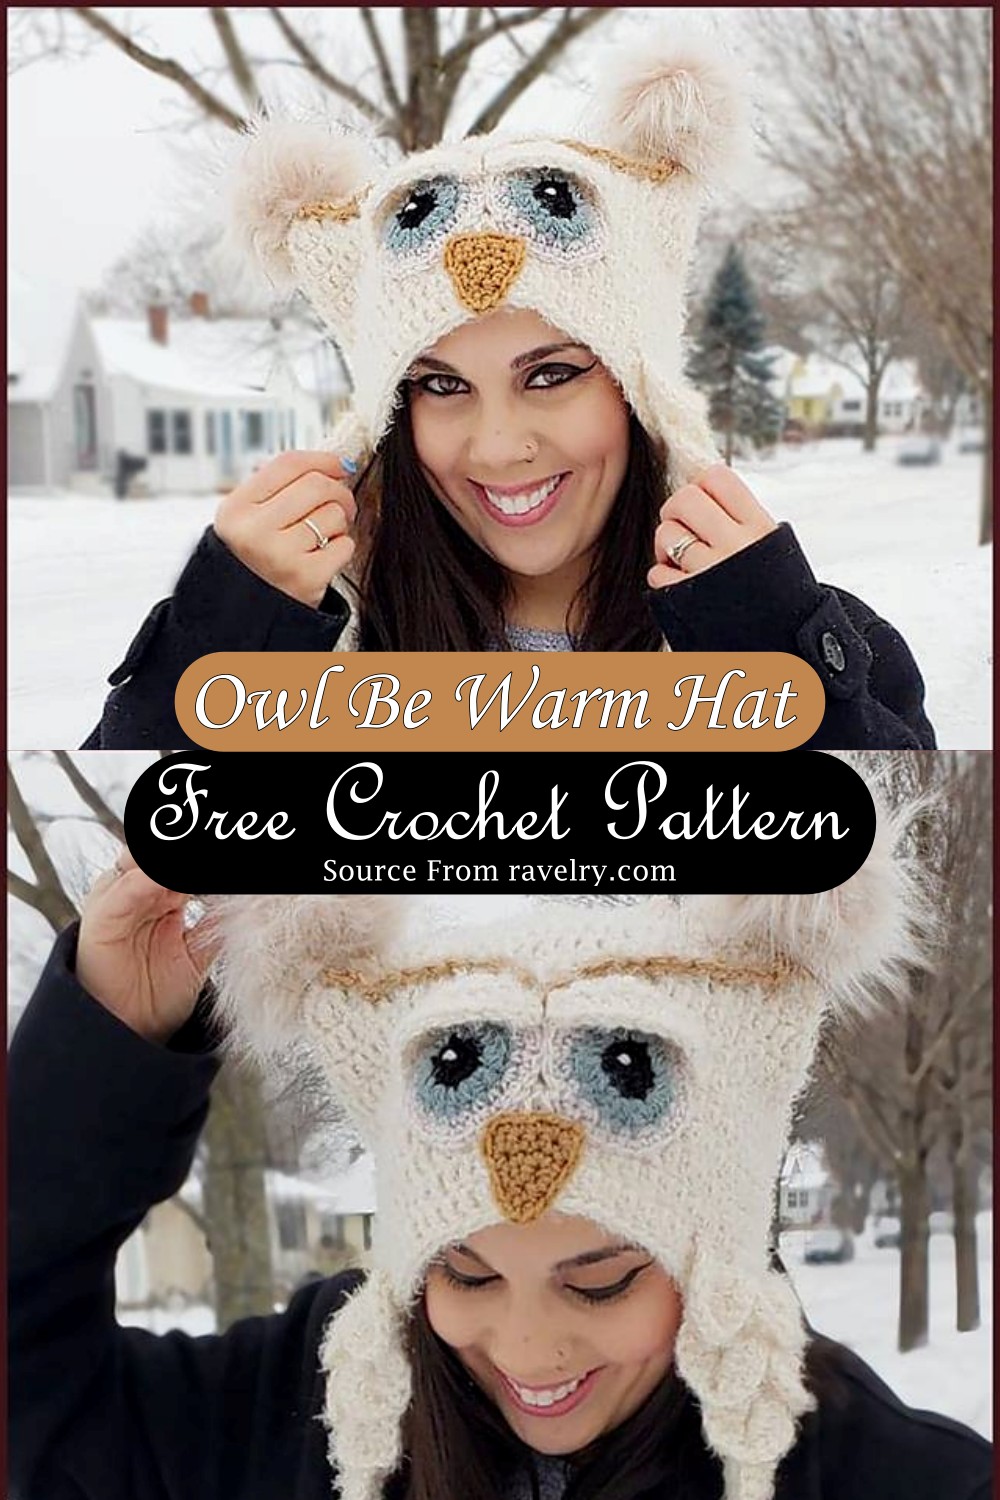 Owl Be Warm Hat